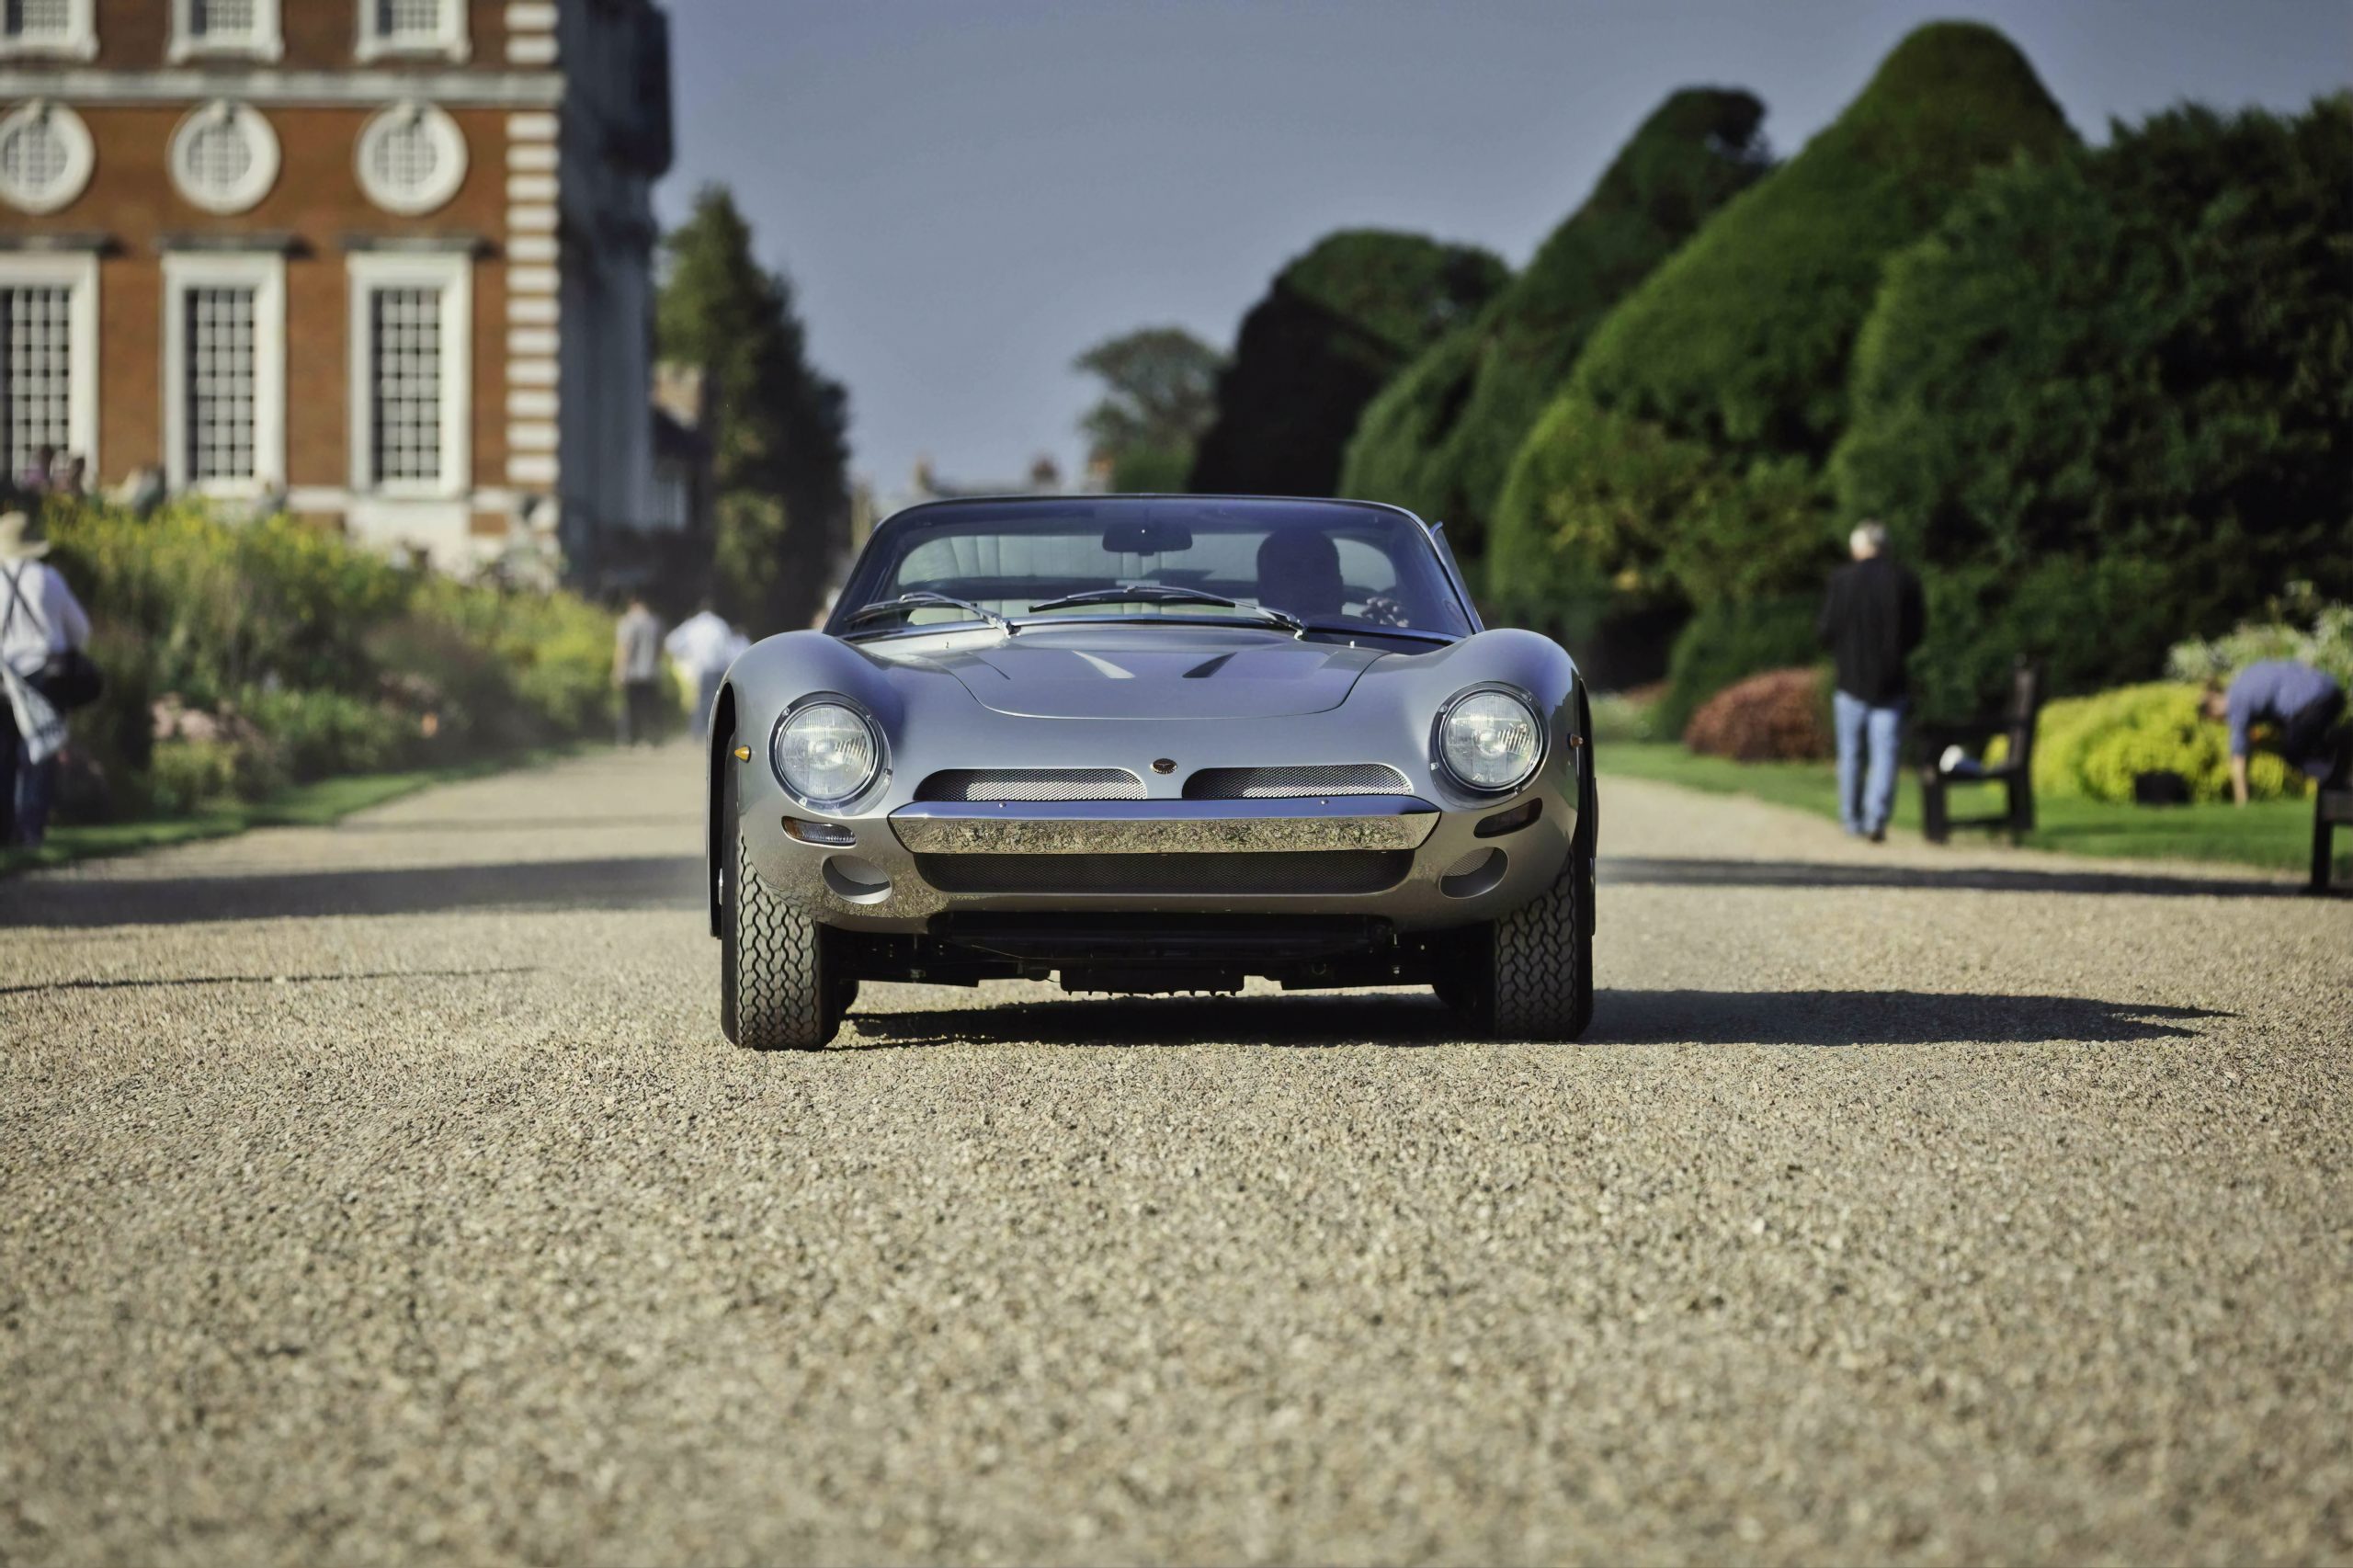 Bizzarrini is back with former Aston Martin boss behind the wheel